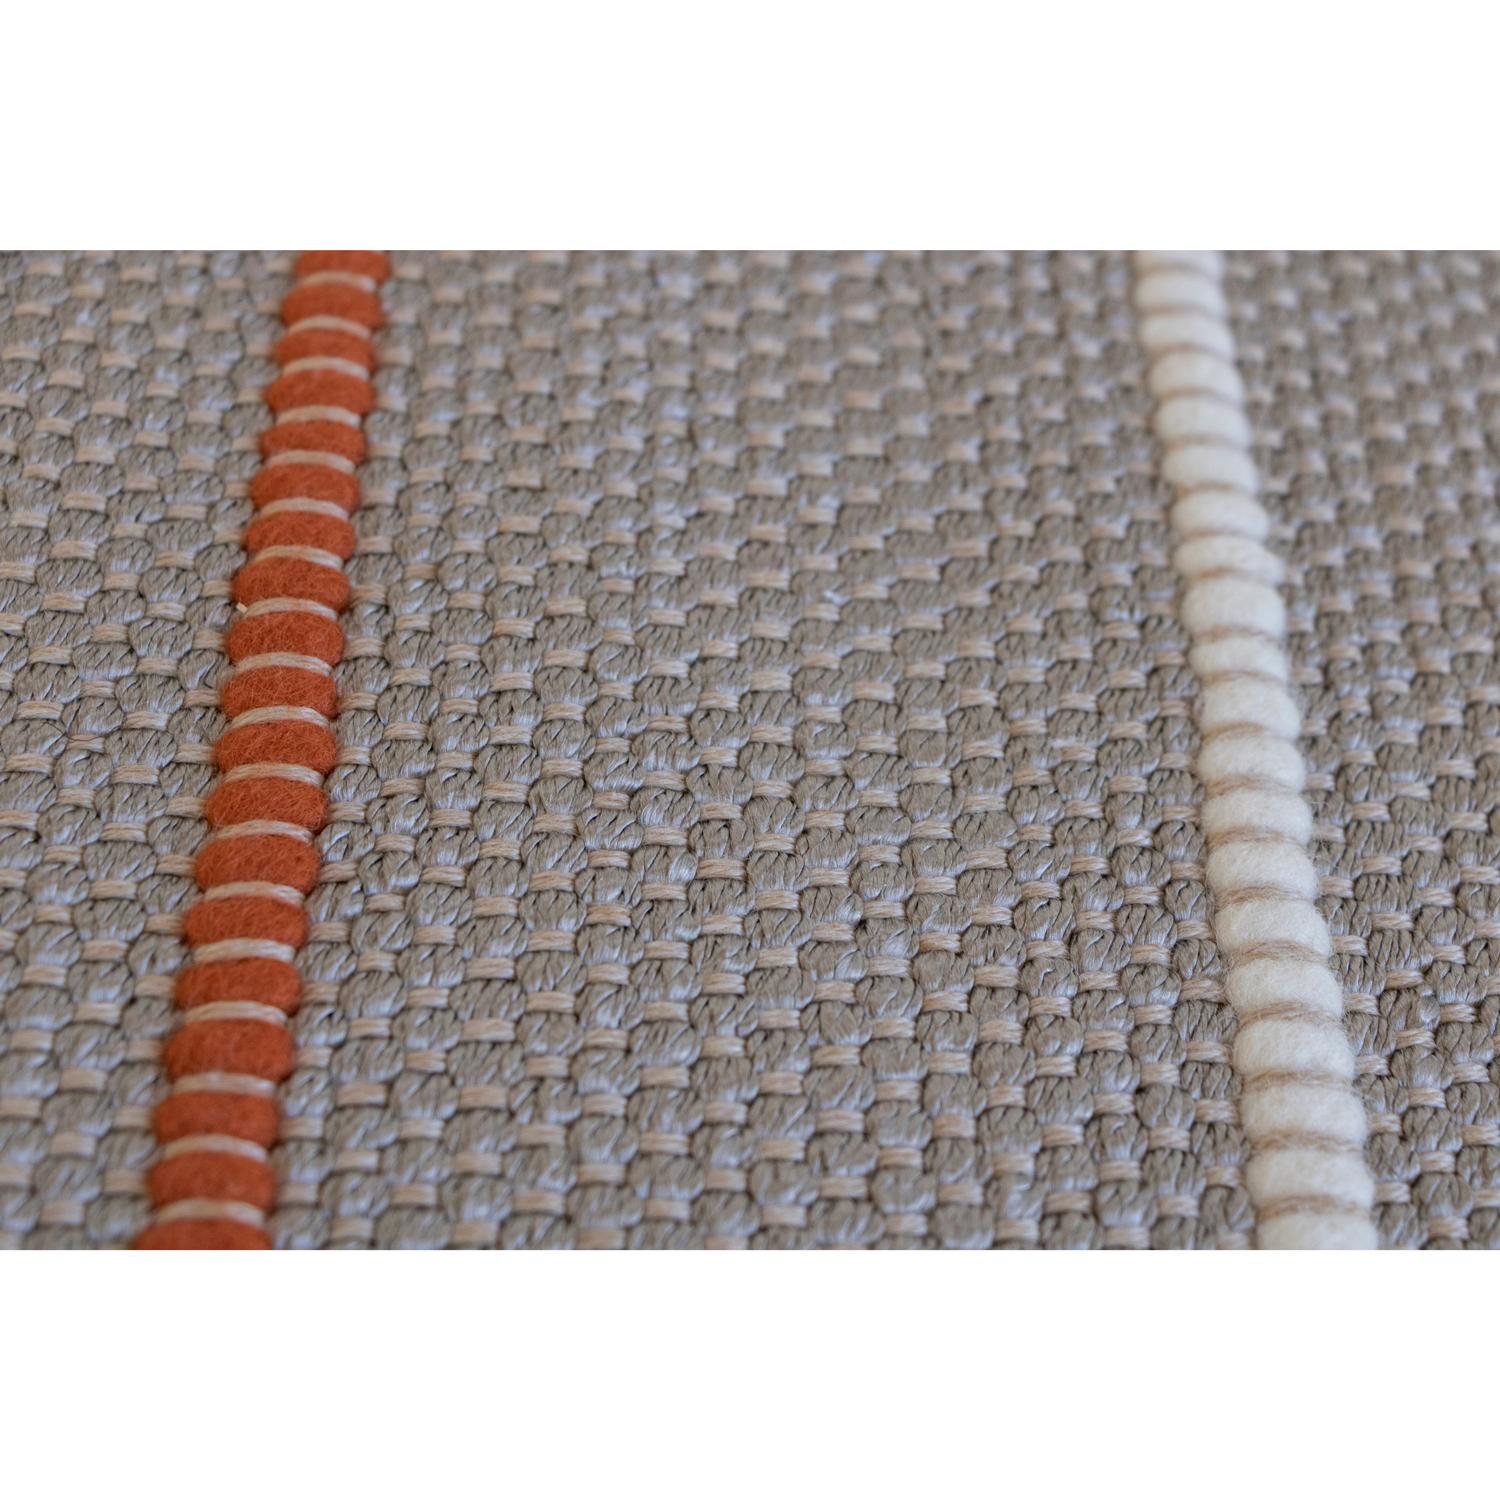 Contemporary 21st Cent In & Out Light Grey Long Rug by Deanna Comellini In Stock 164x370 cm For Sale